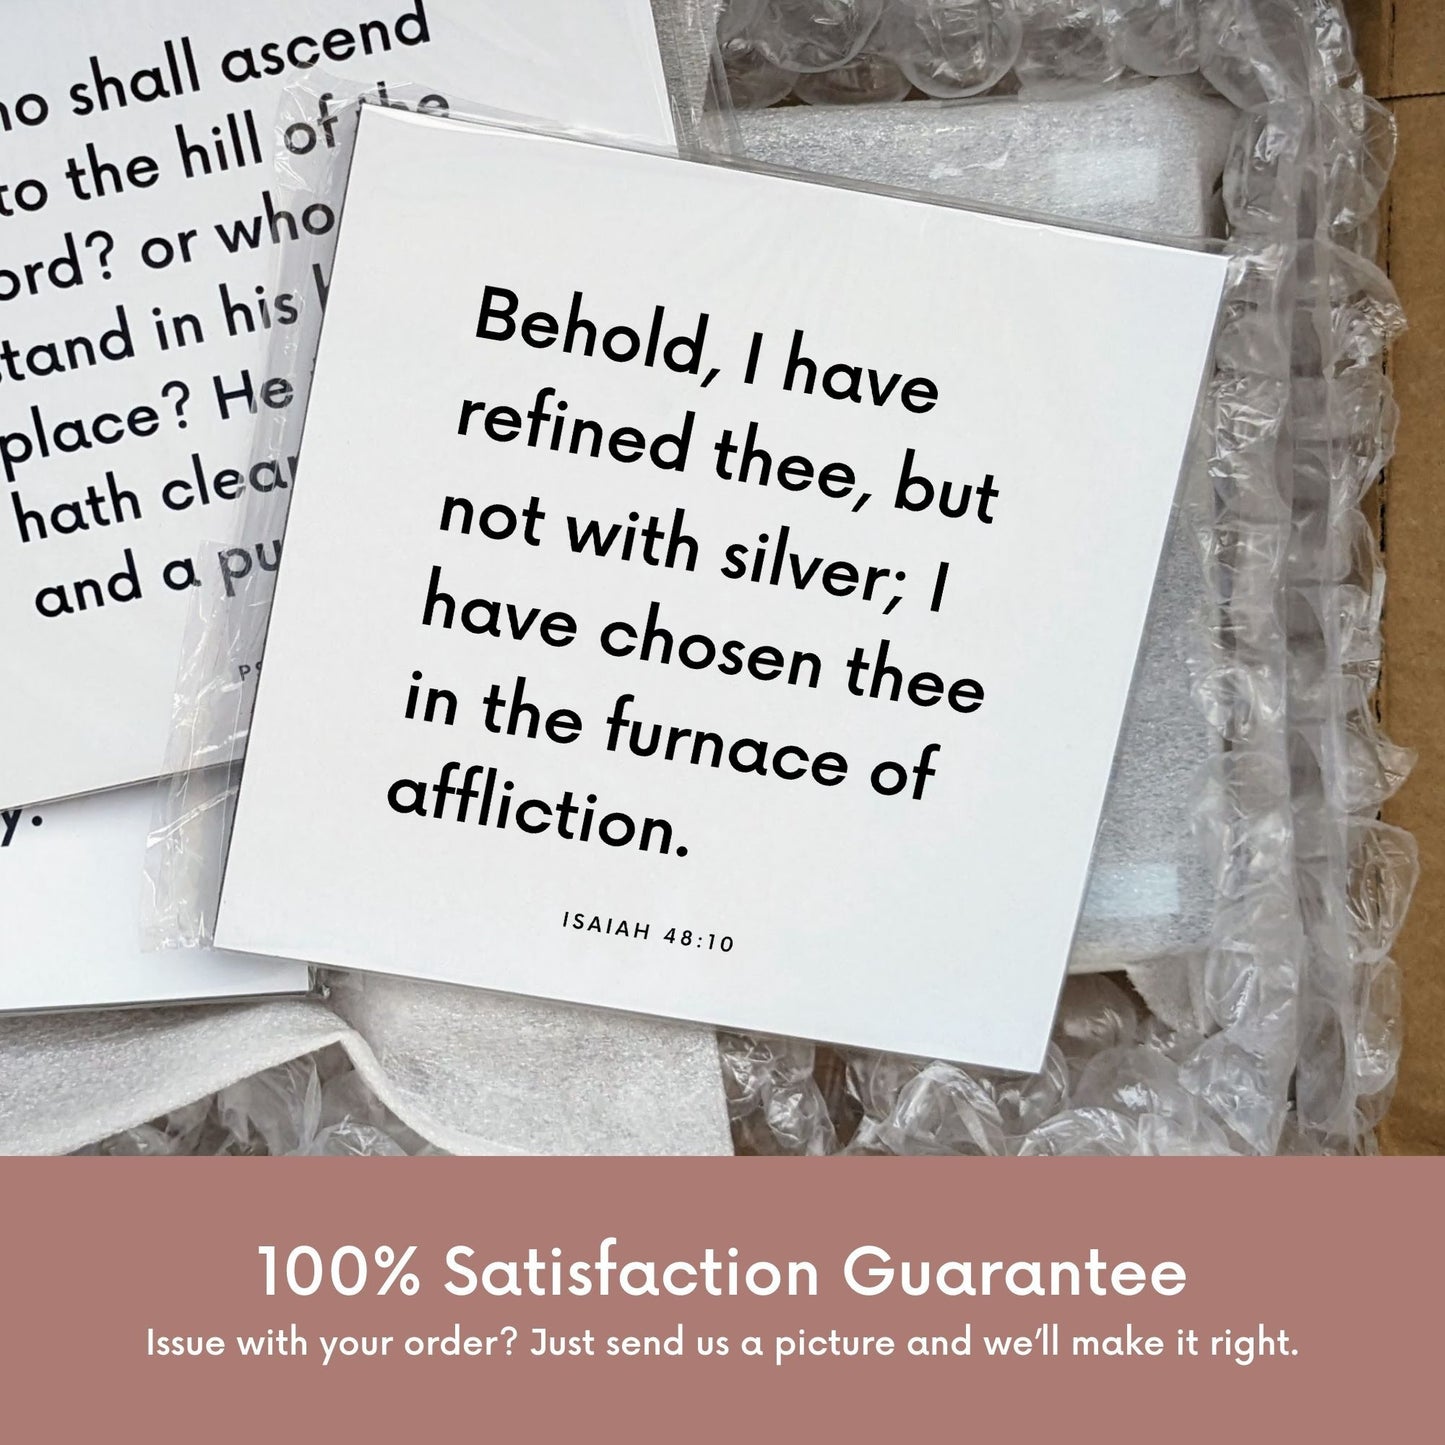 Shipping materials for scripture tile of Isaiah 48:10 - "I have chosen thee in the furnace of affliction"